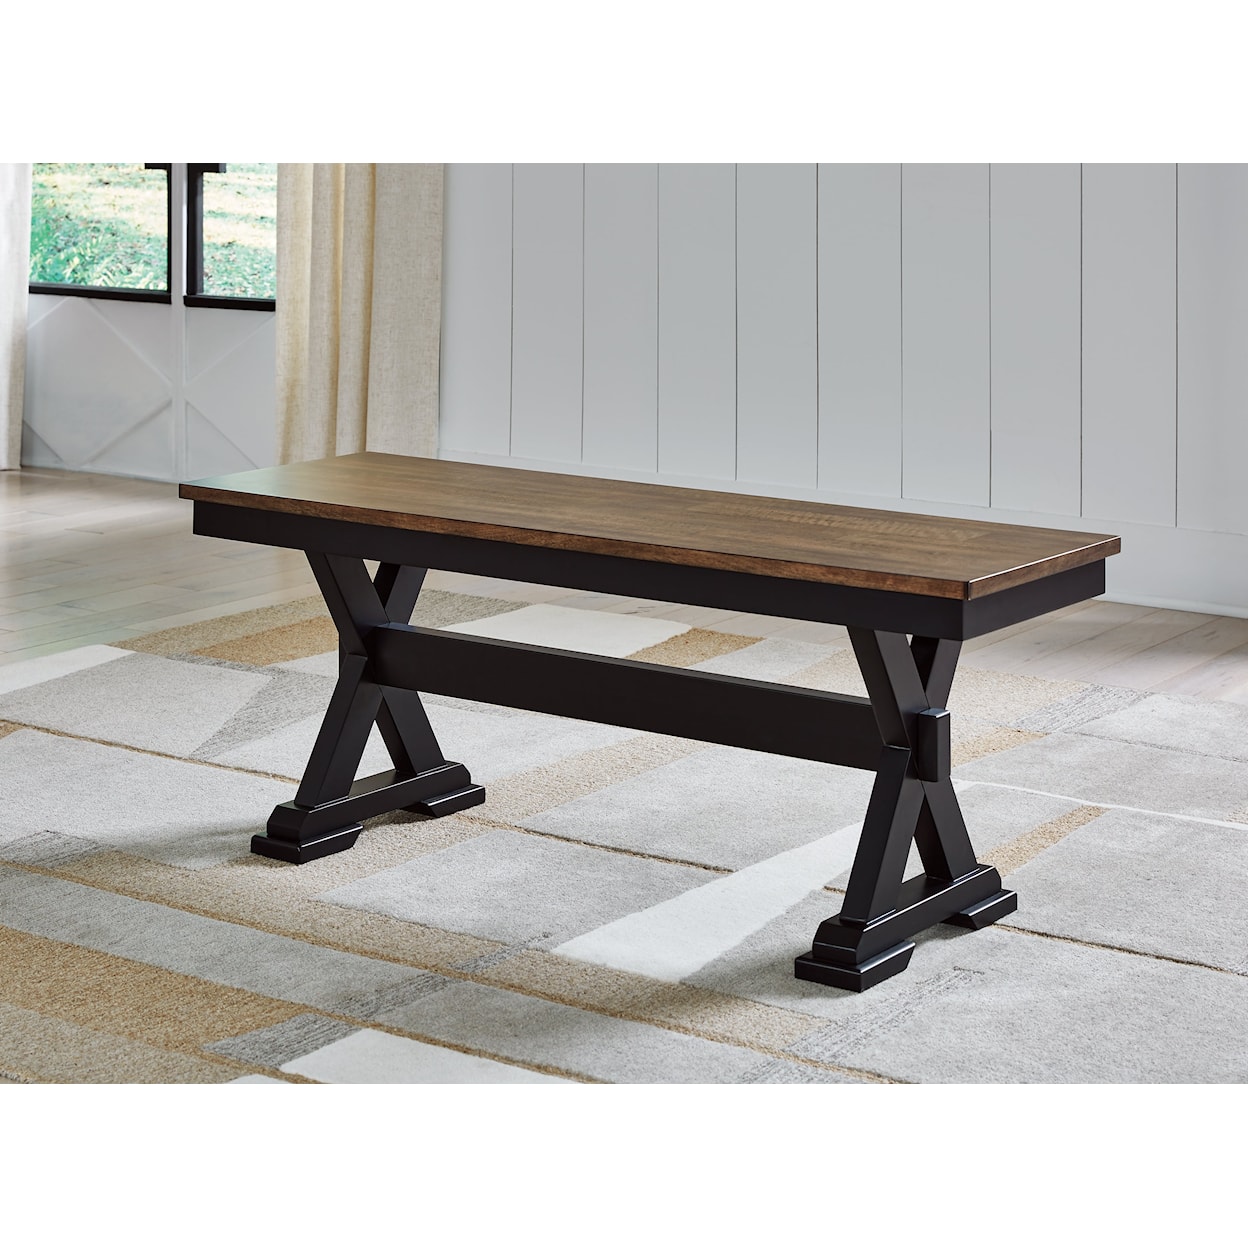 Signature Design by Ashley Wildenauer Large Dining Room Bench